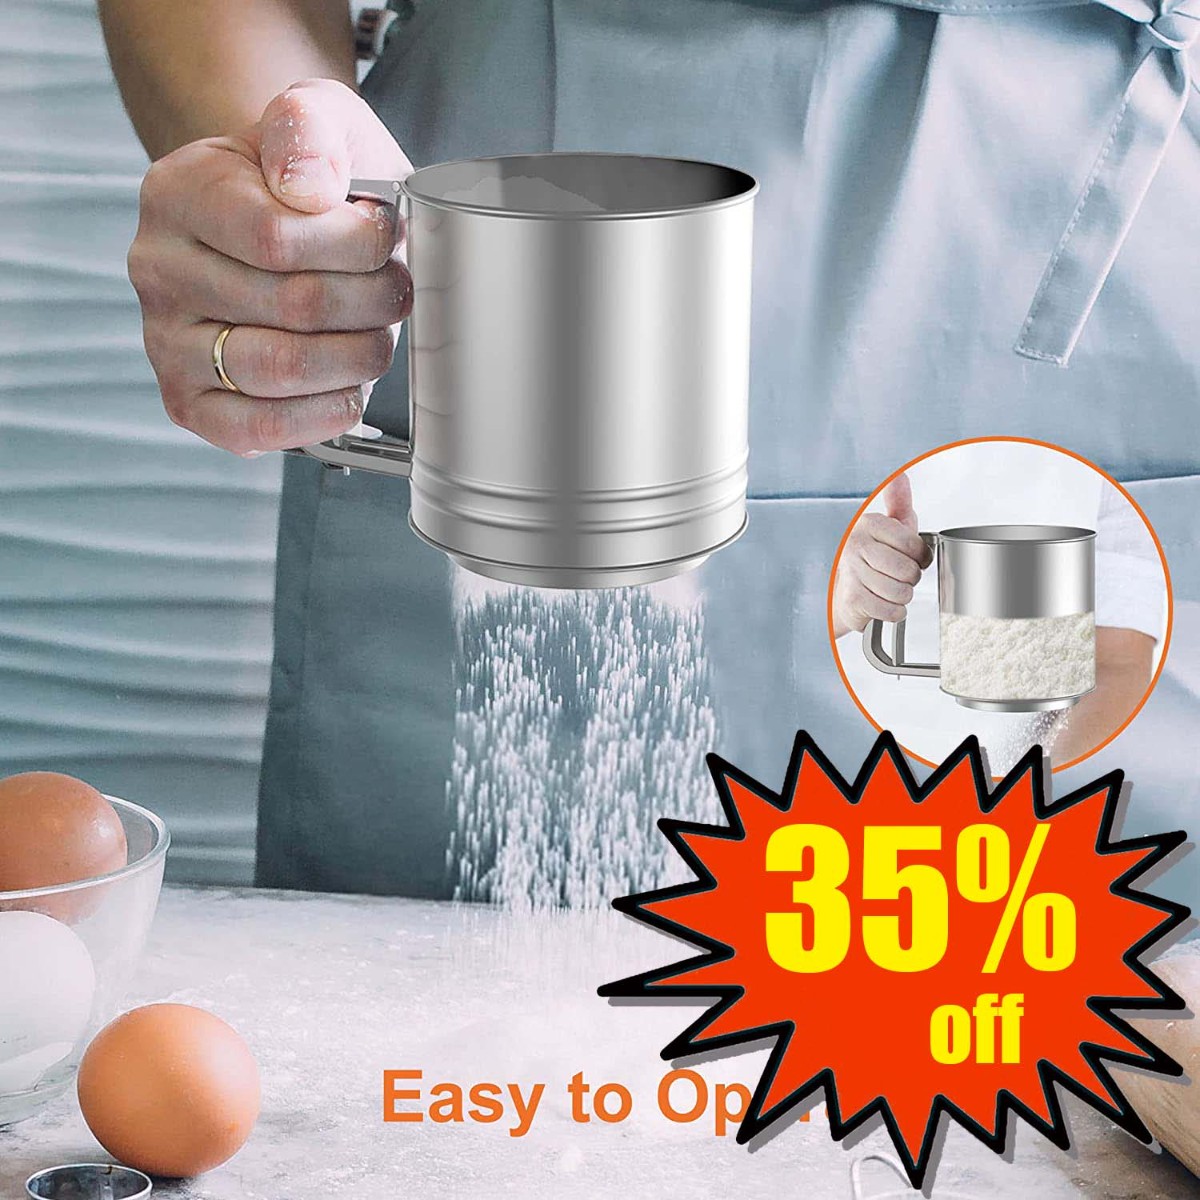 （Valid In: US）Flour Sifter, Baking Stainless Steel Flour Sieve Cup - 35% OFF